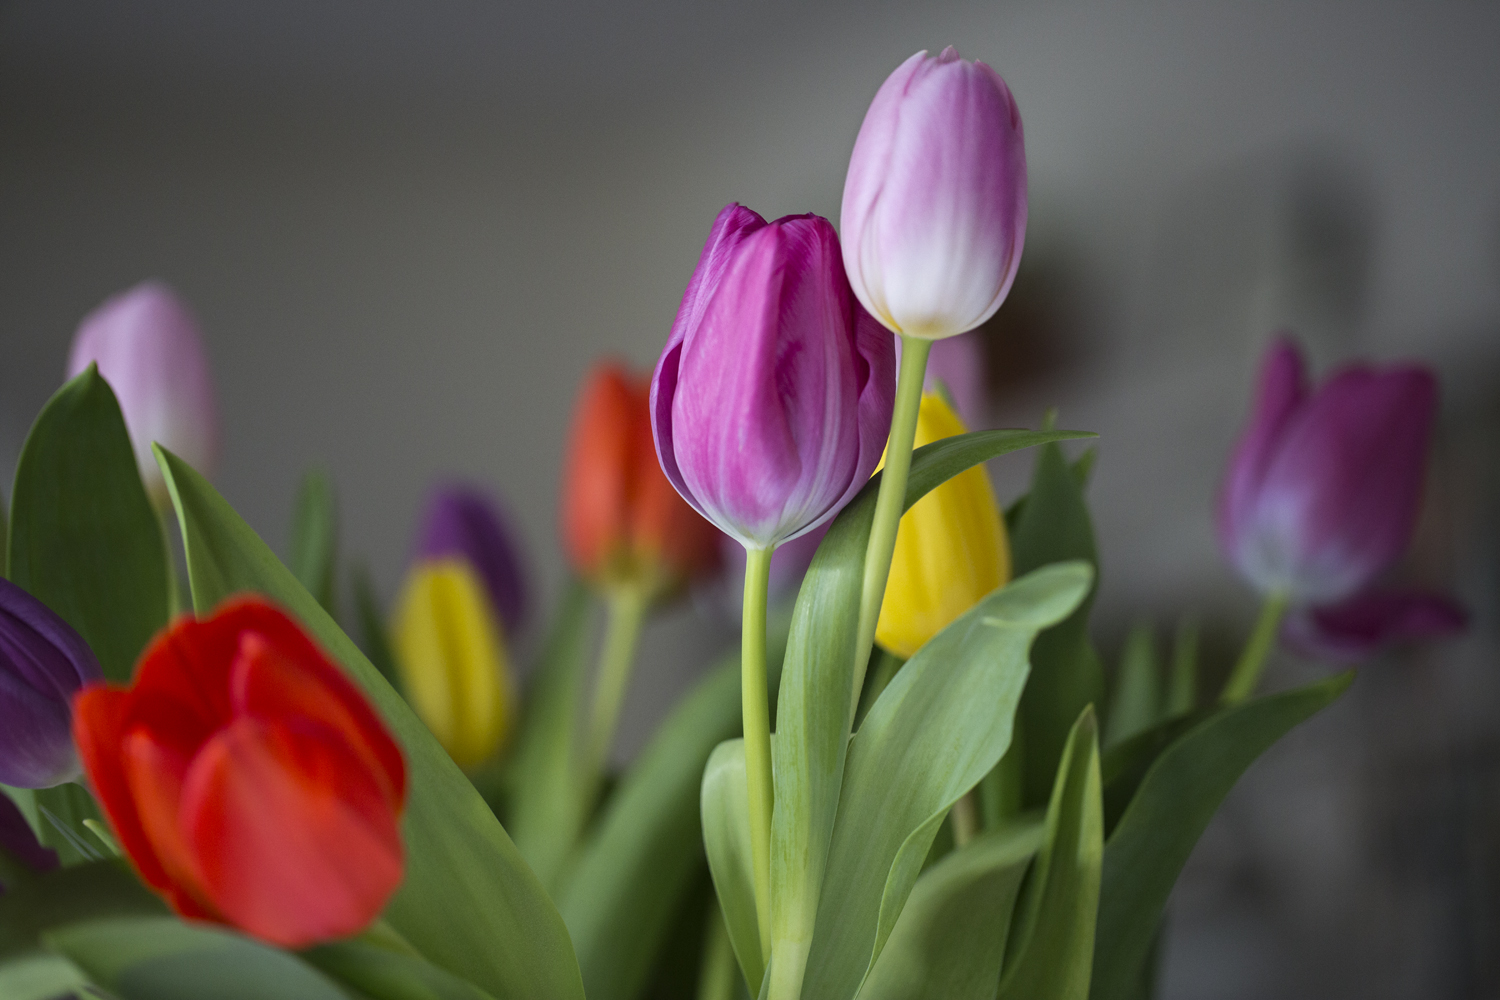 amys_many_colored_tulips_03-01-16_4261.jpg